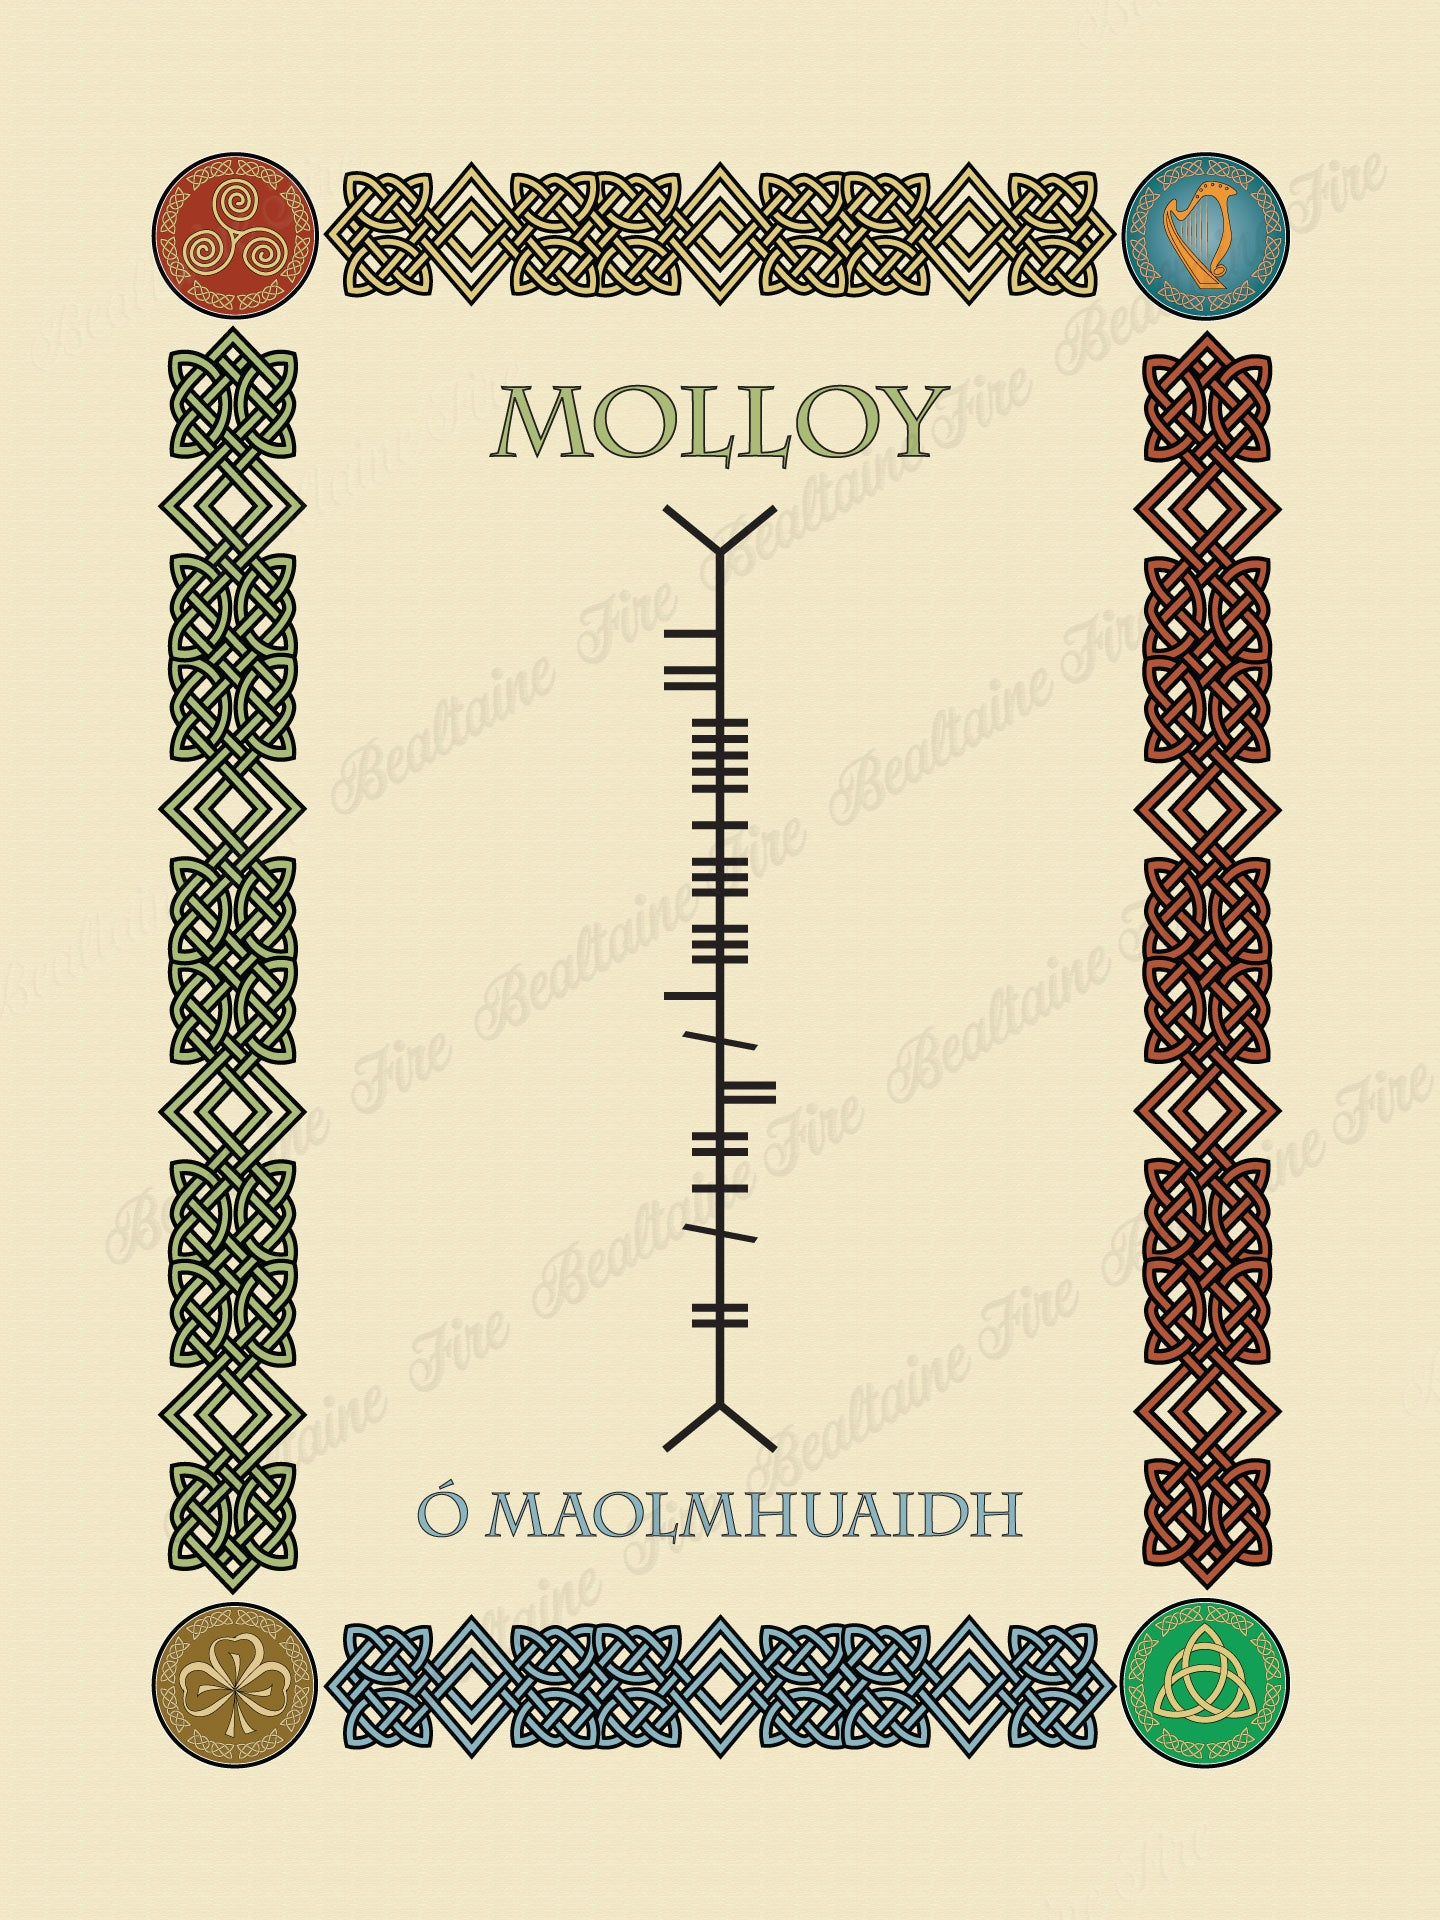 Molloy in Old Irish and Ogham - PDF Download